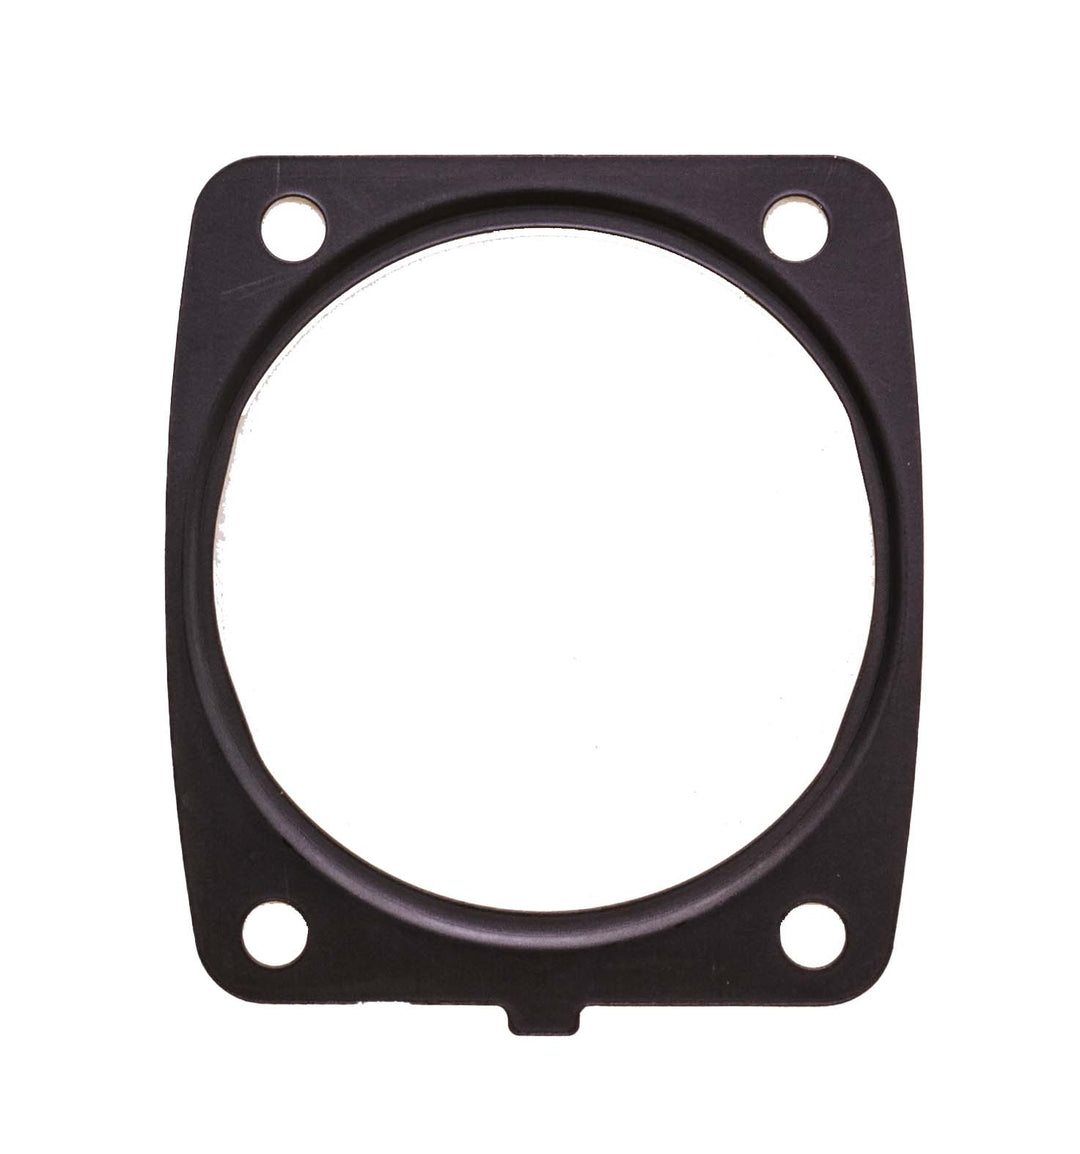 DUKE'S CYLINDER AND EXHAUST GASKETS FITS STIHL MS361 HOLZFFORMA G366